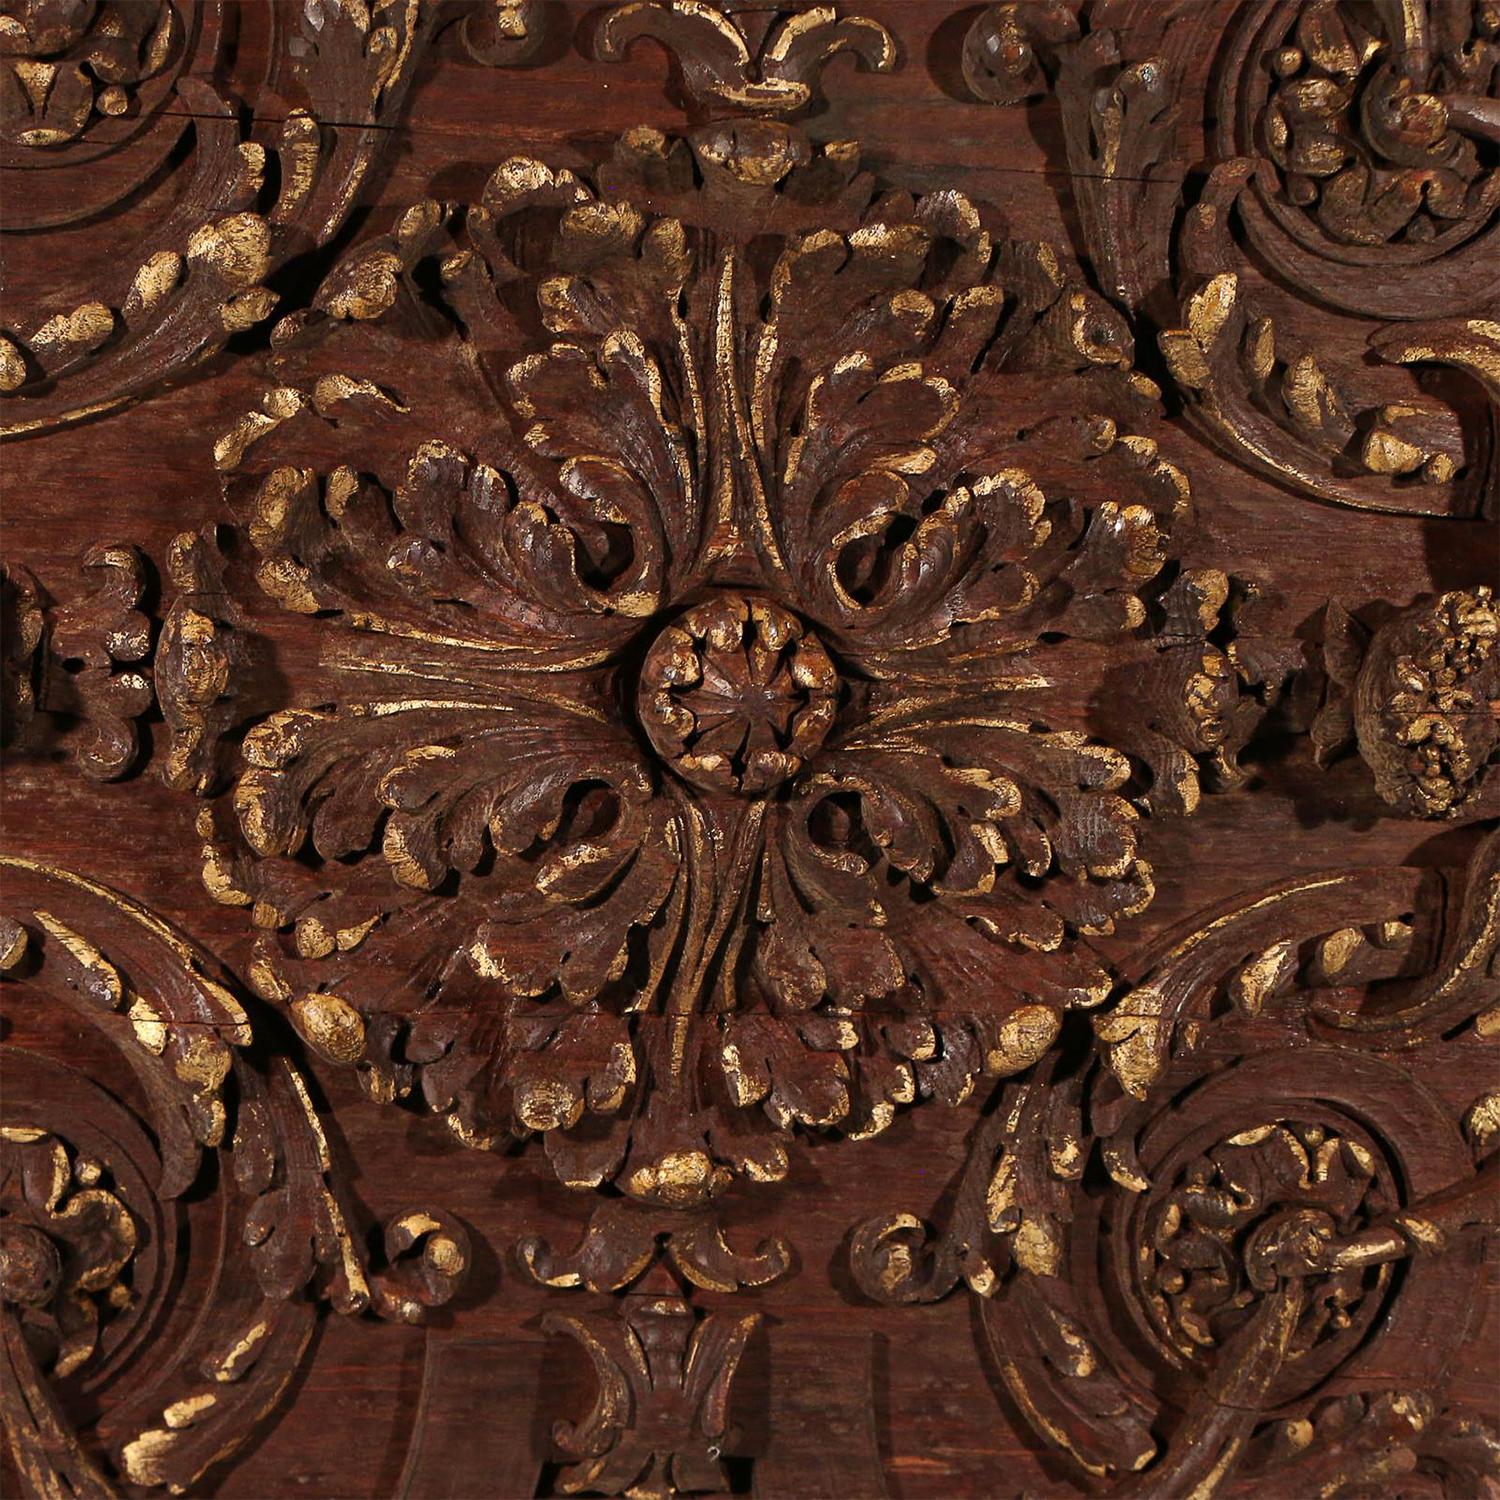 A large dark brown Italian ceiling panel made of hand carved walnut, enhanced with caryatid and acanthus scrolls, in good condition. The antique wall relief, décor represents the Rococo time period. Wear consistent with age and use, circa 1790-1810,